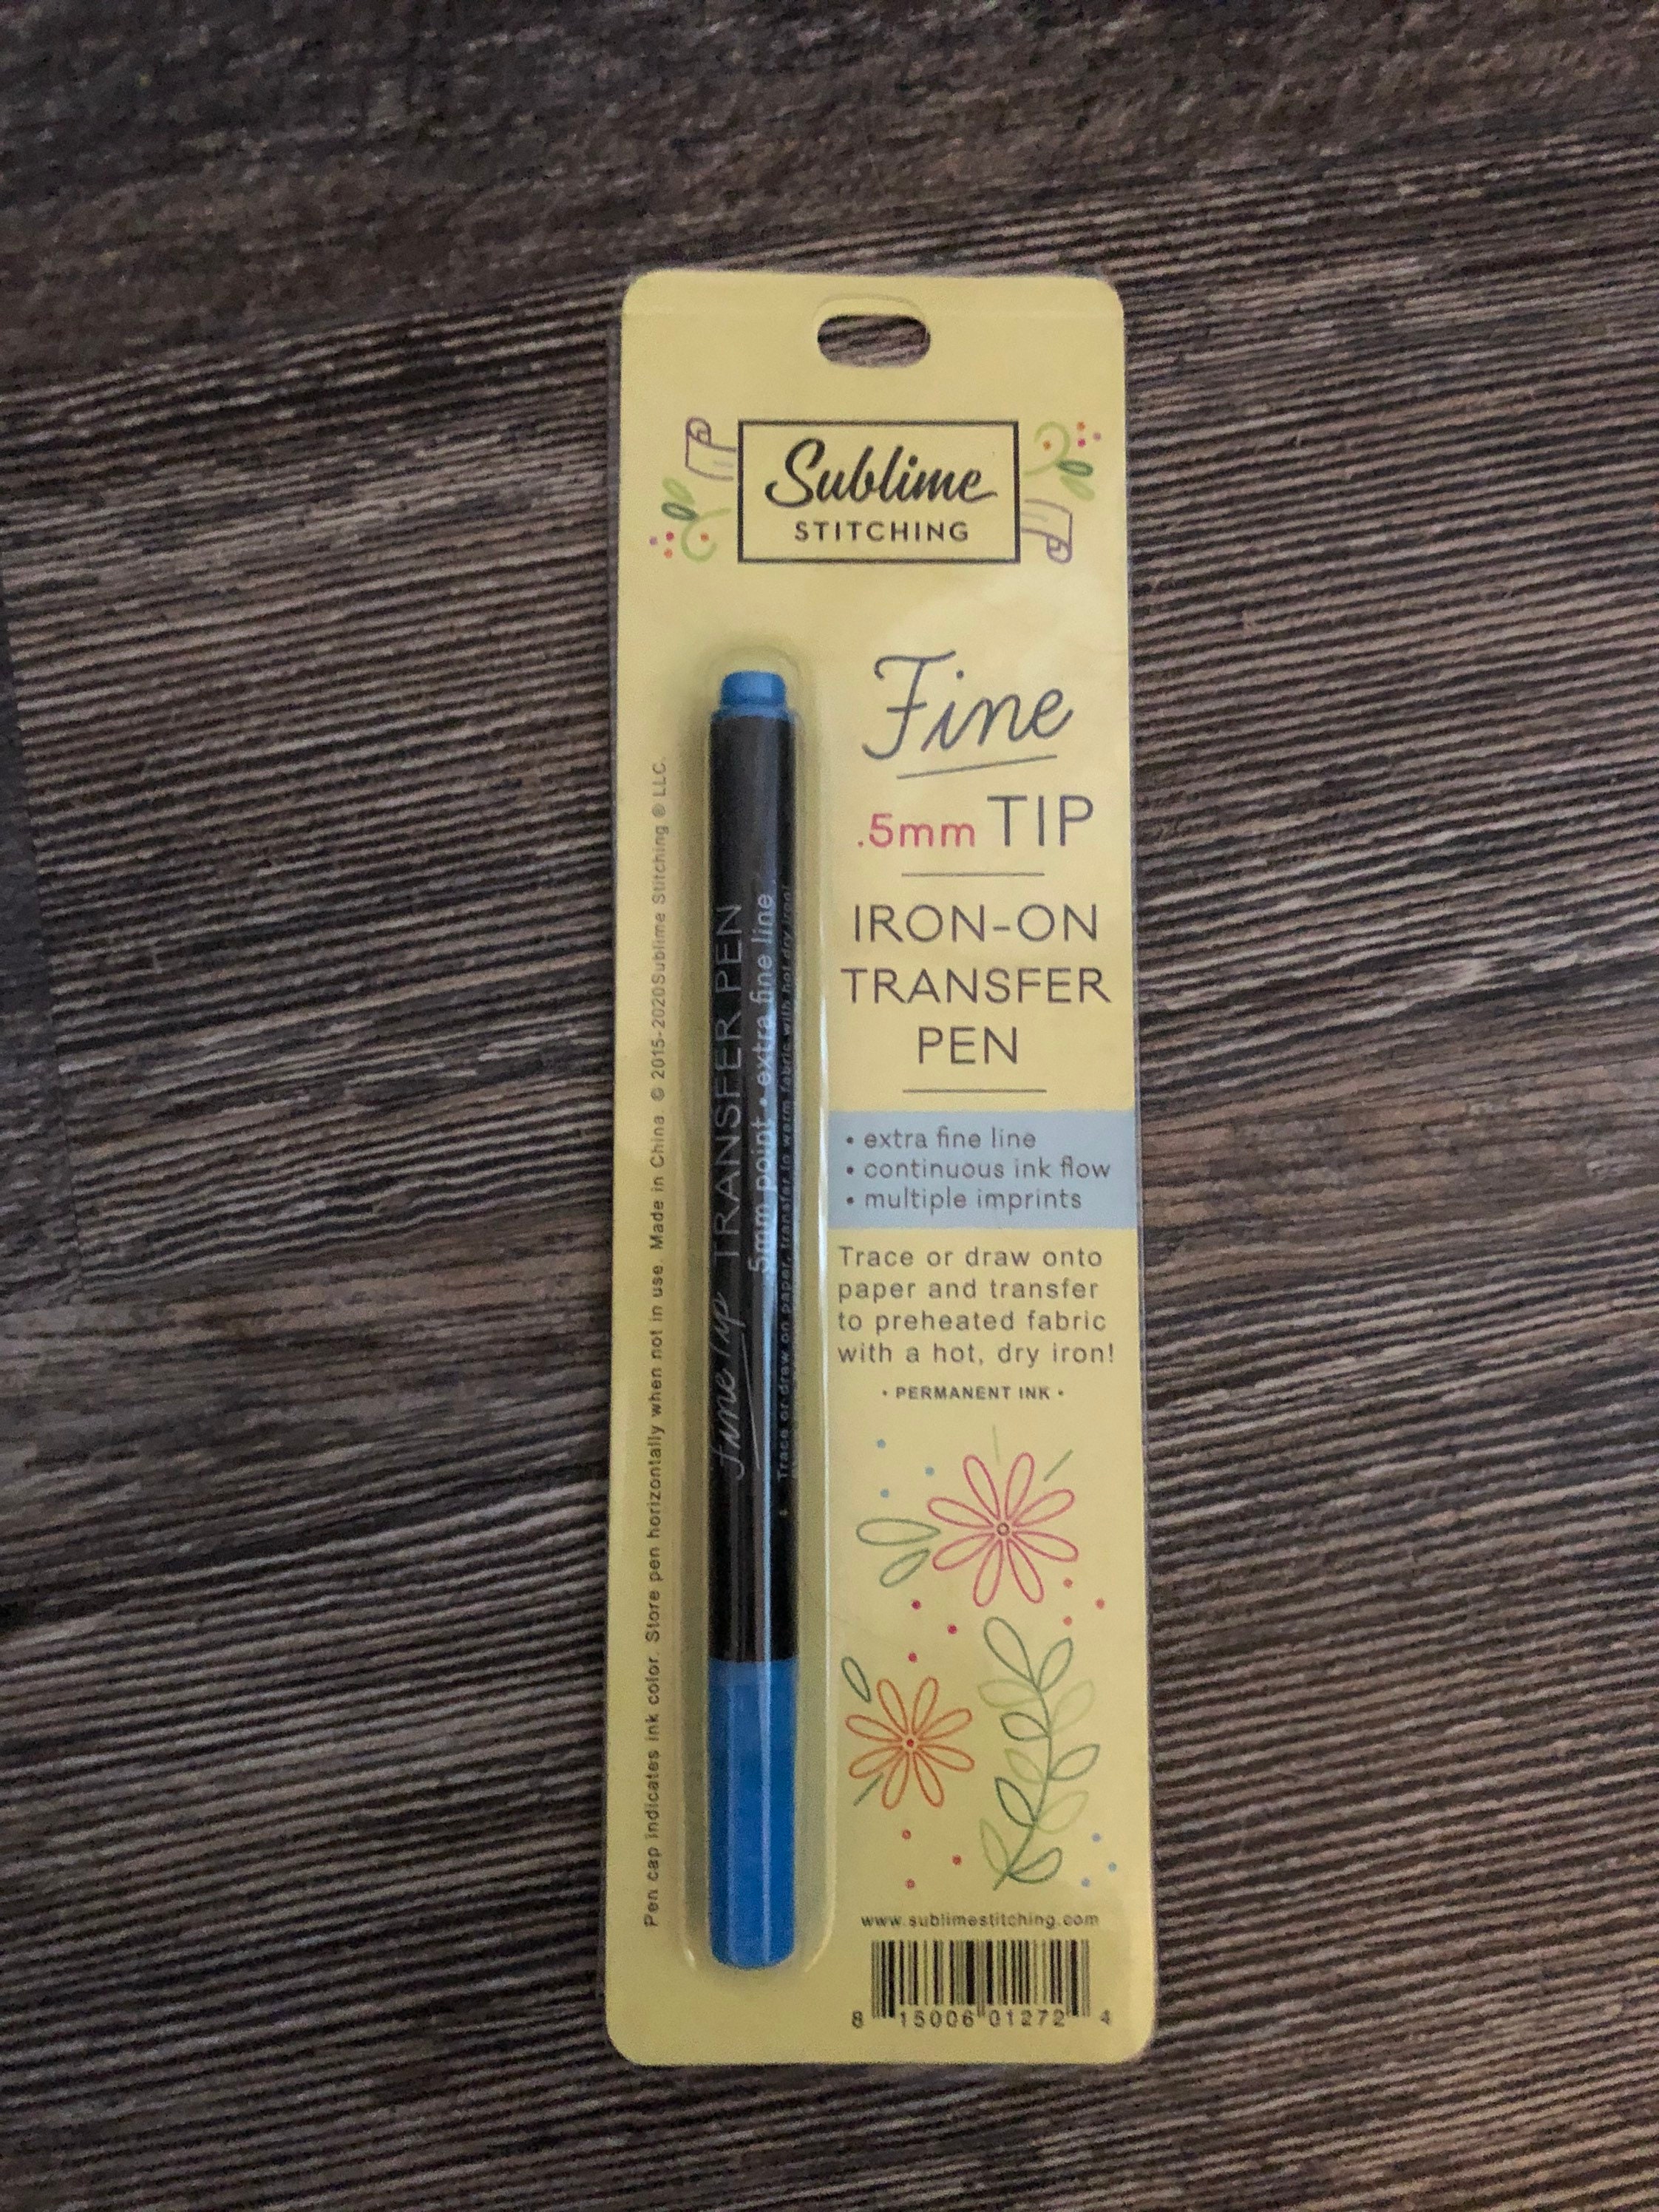 FINE TIP Iron-On Transfer Pens from Sublime Stitching